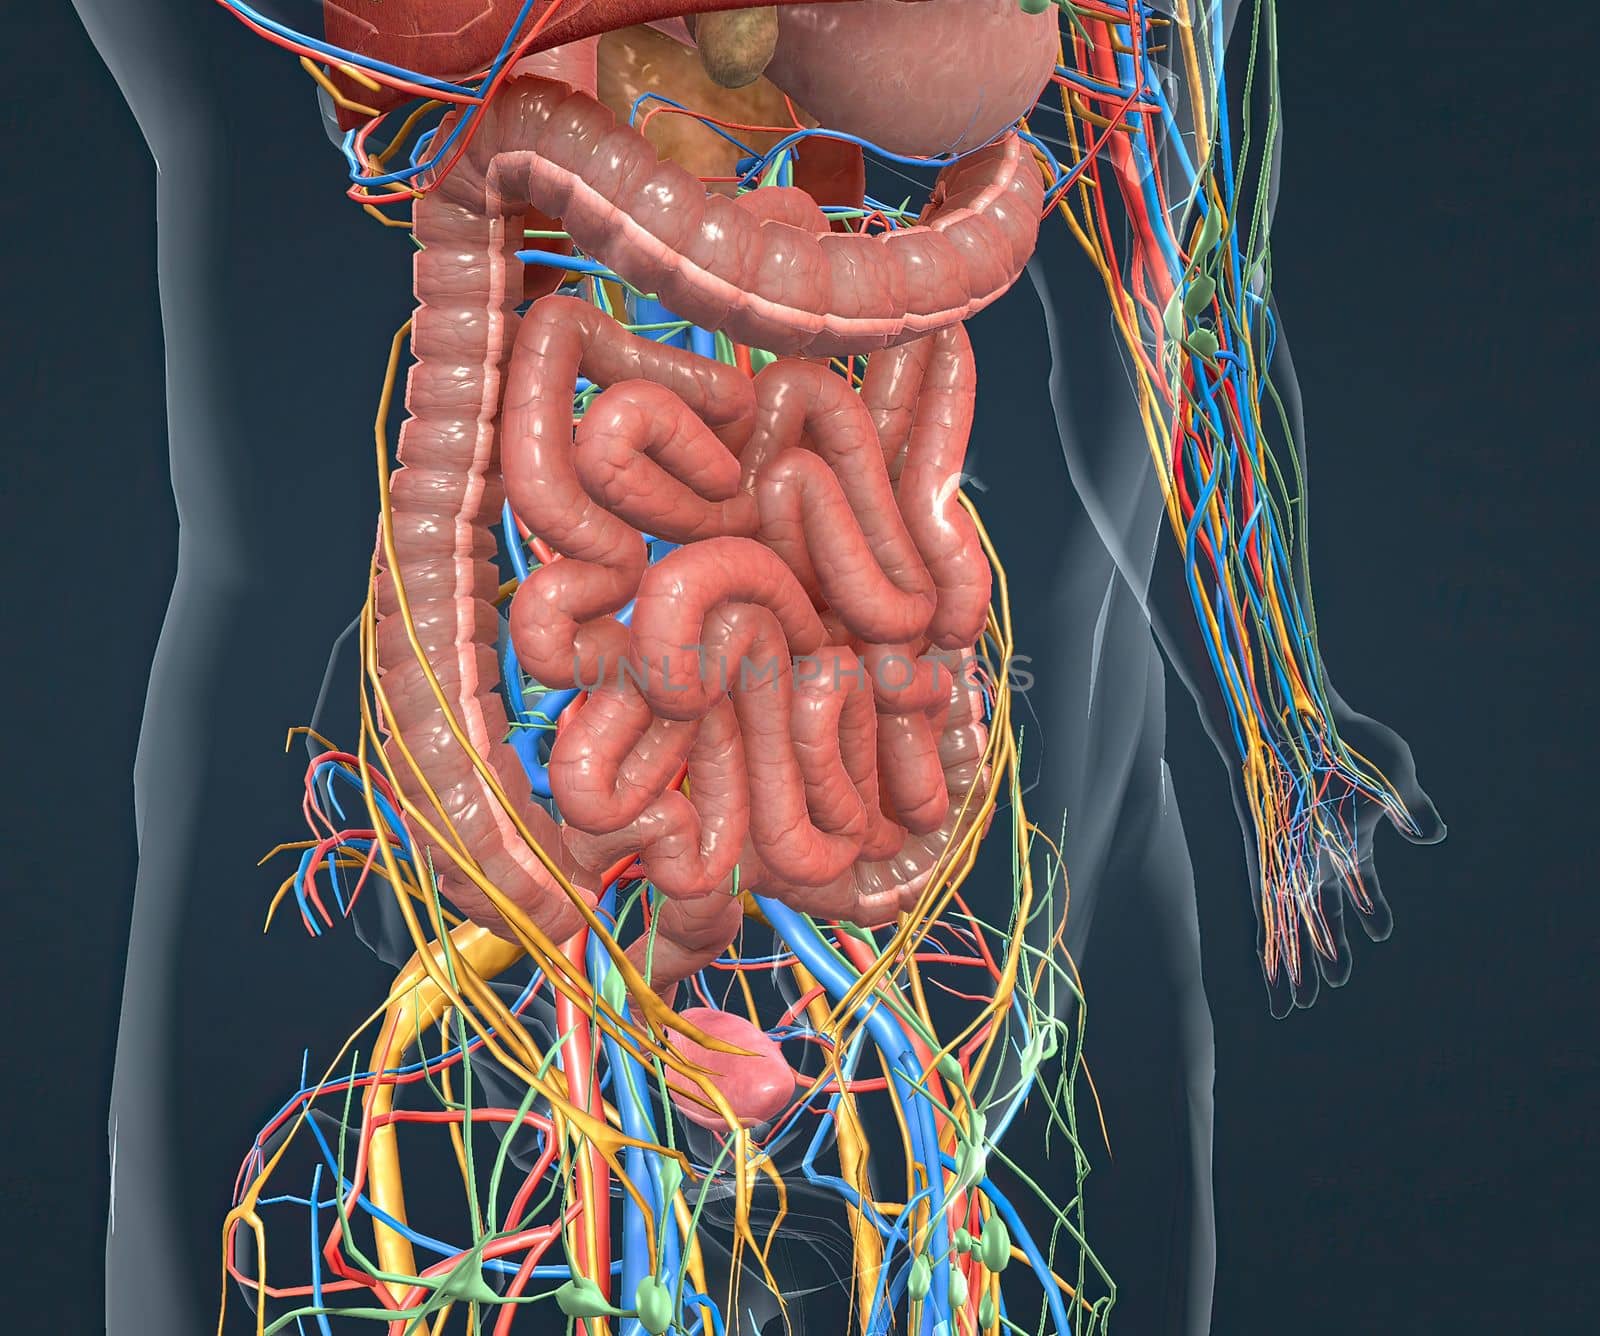 Digestive system, nervous system and vascular pathways by creativepic